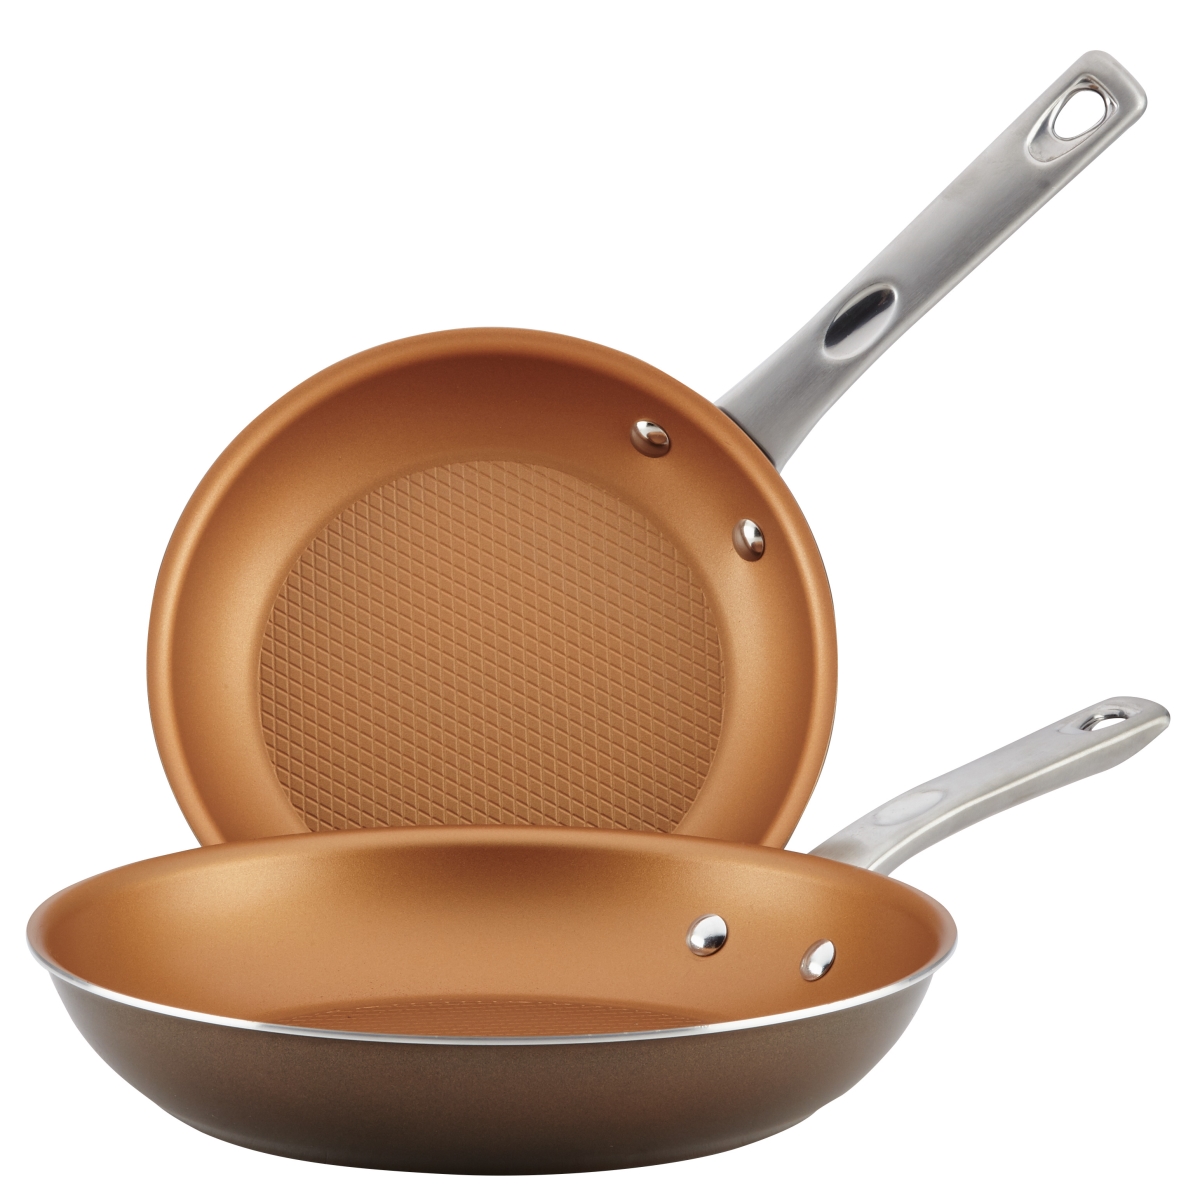 Picture of Ayesha Curry 10763 Porcelain Enamel Nonstick Skillet - Pack of 2, Brown Sugar